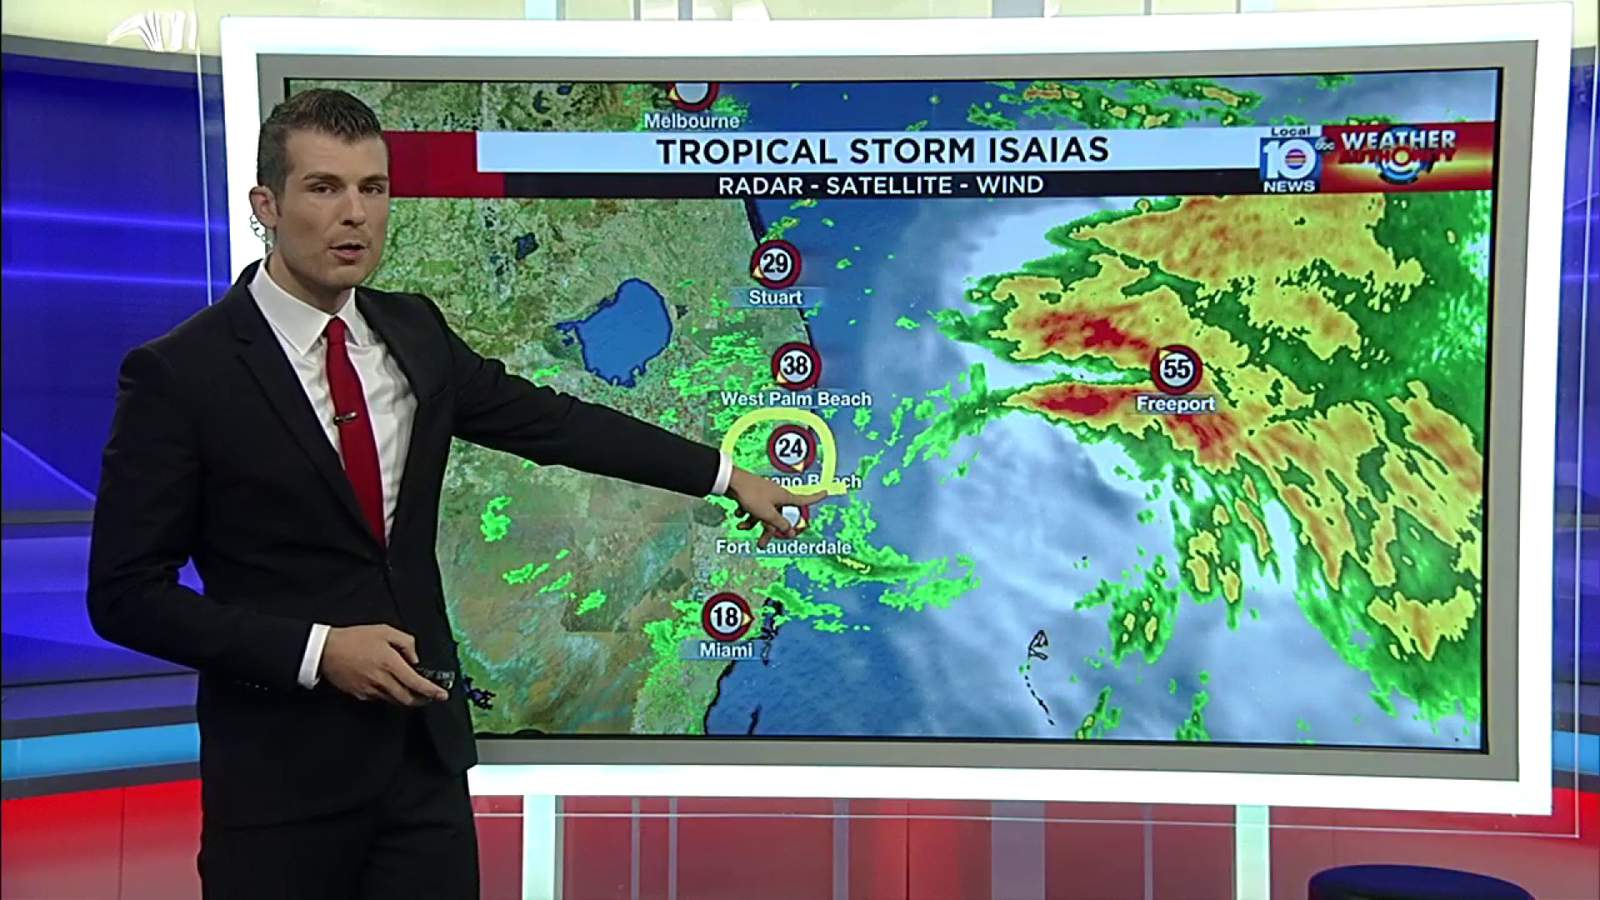 Expect rain bands even as Tropical Storm Isaias moves away from South Florida